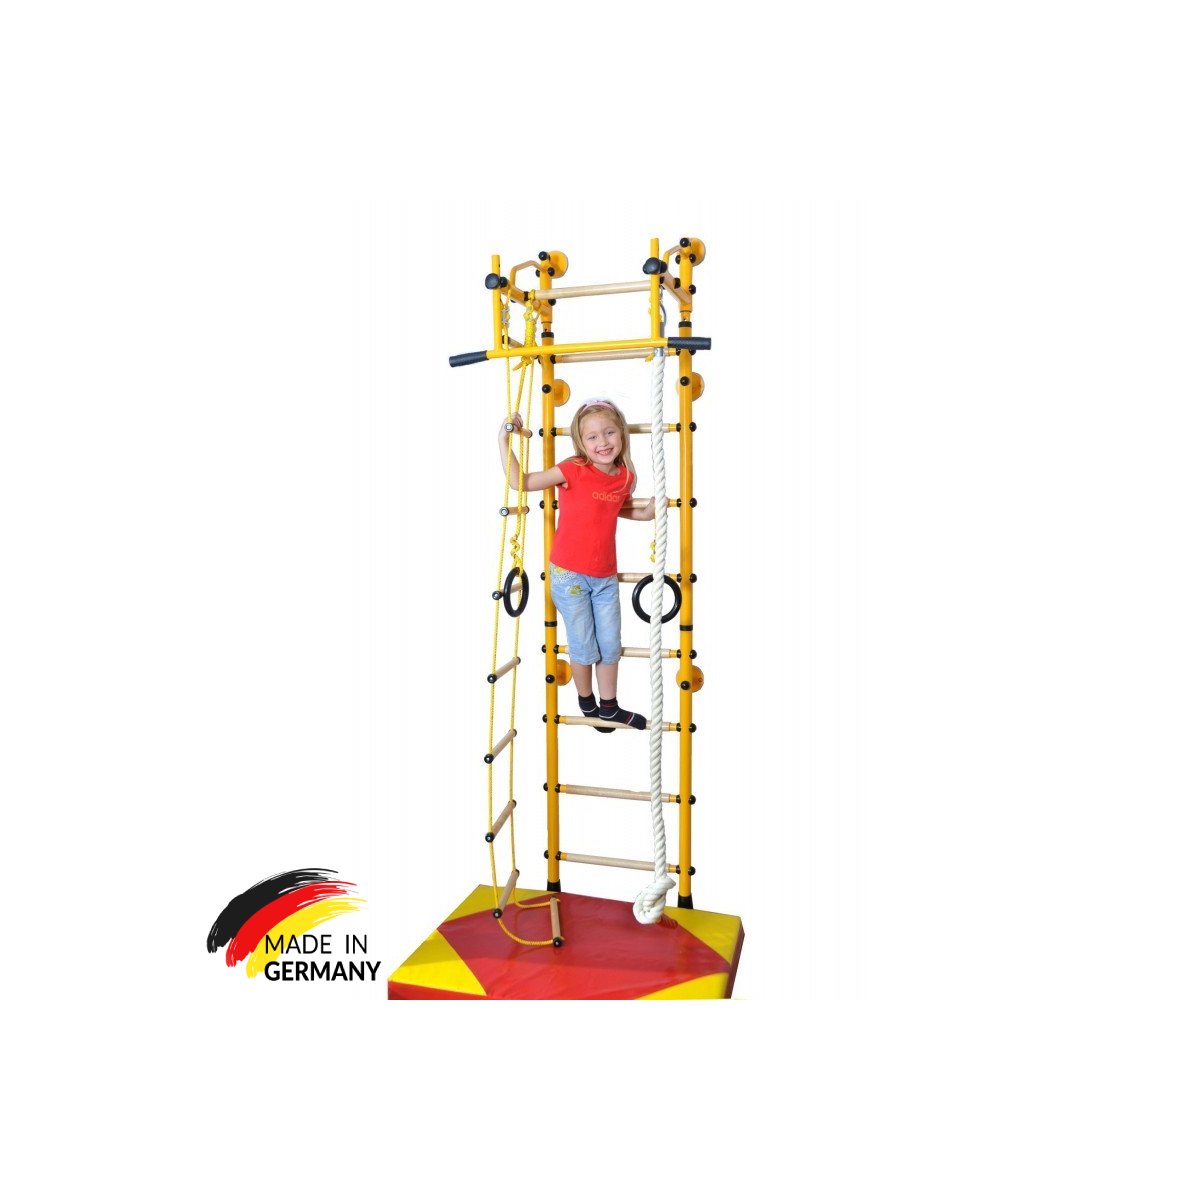 Rope Ladder Trapeze Rope NiroSport FitTop M1 Indoor Jungle Gym for Kids & Home with Pull Up Bar incl Gymnastic Rings Climbing Rope 